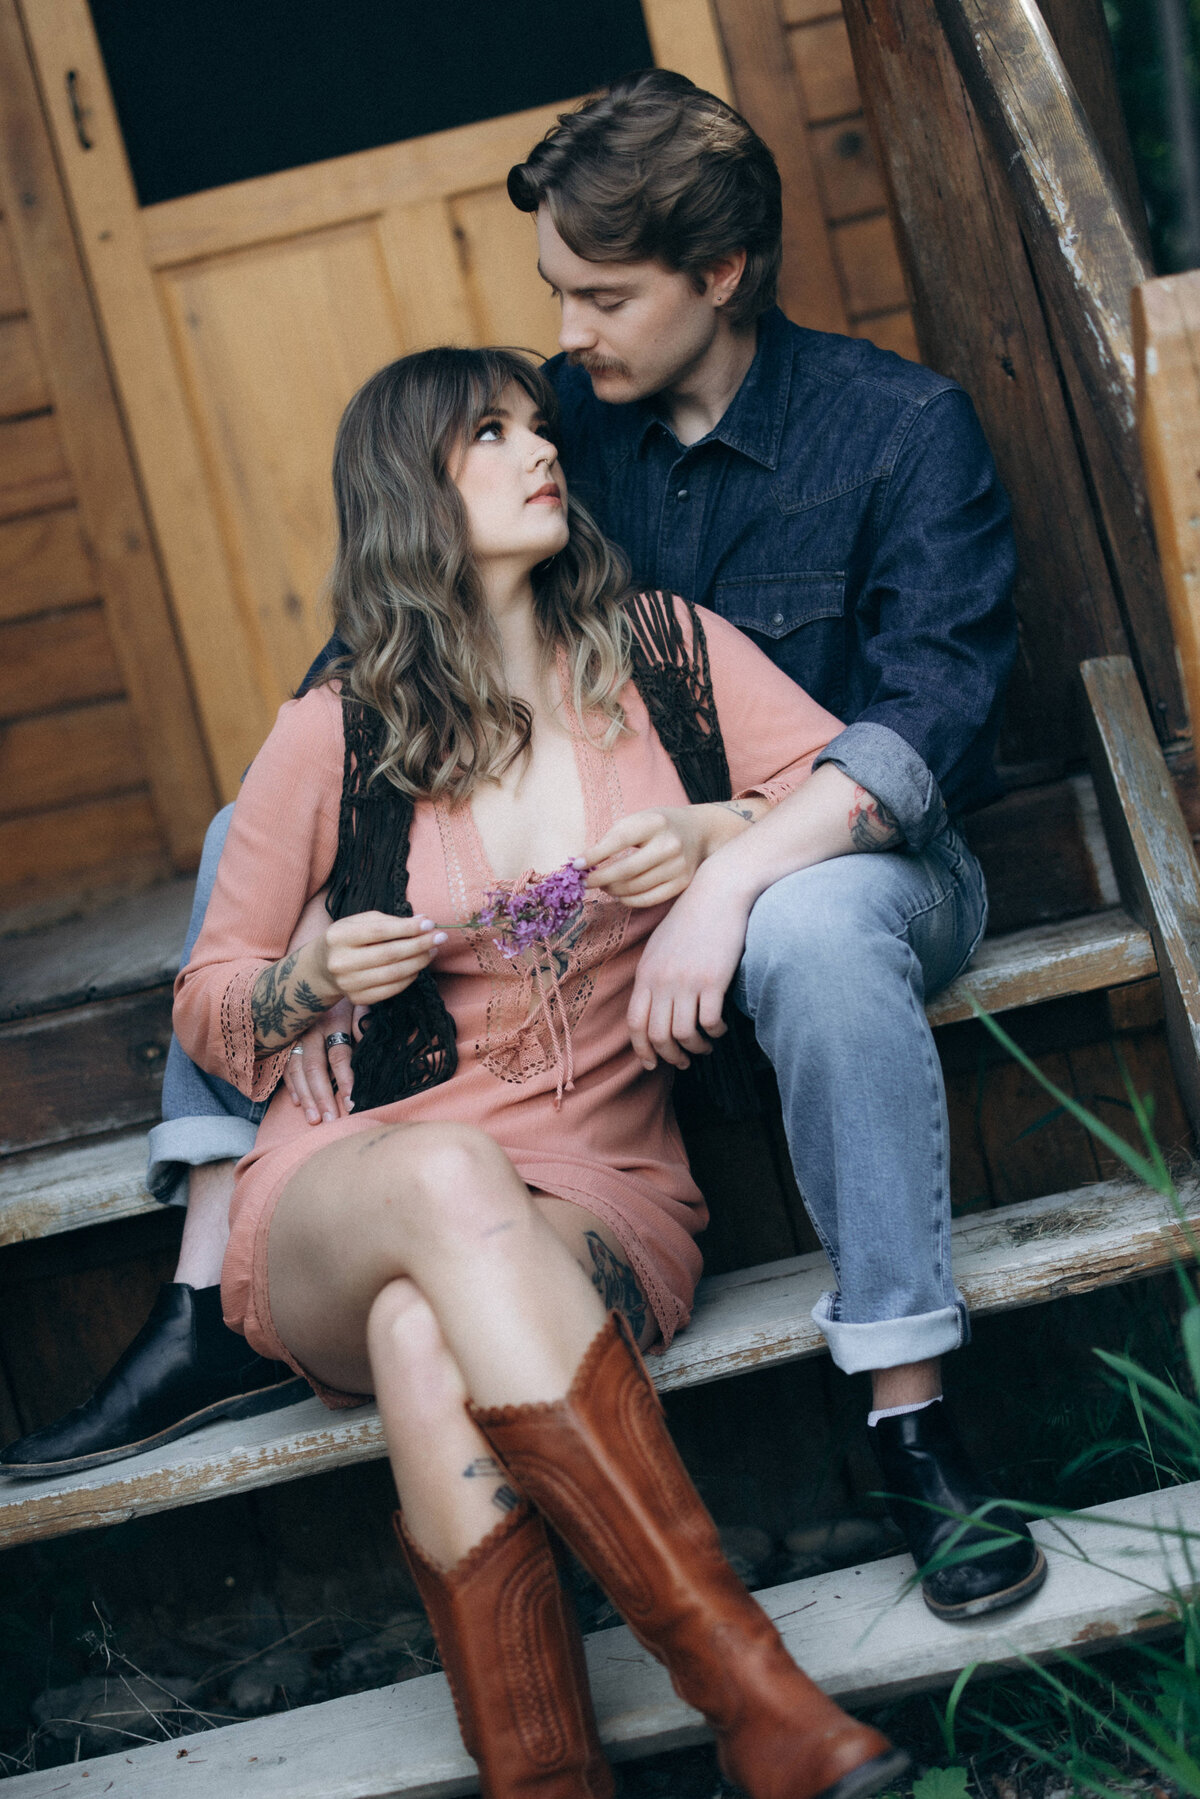 vpc-couples-vintage-cabin-shoot-30